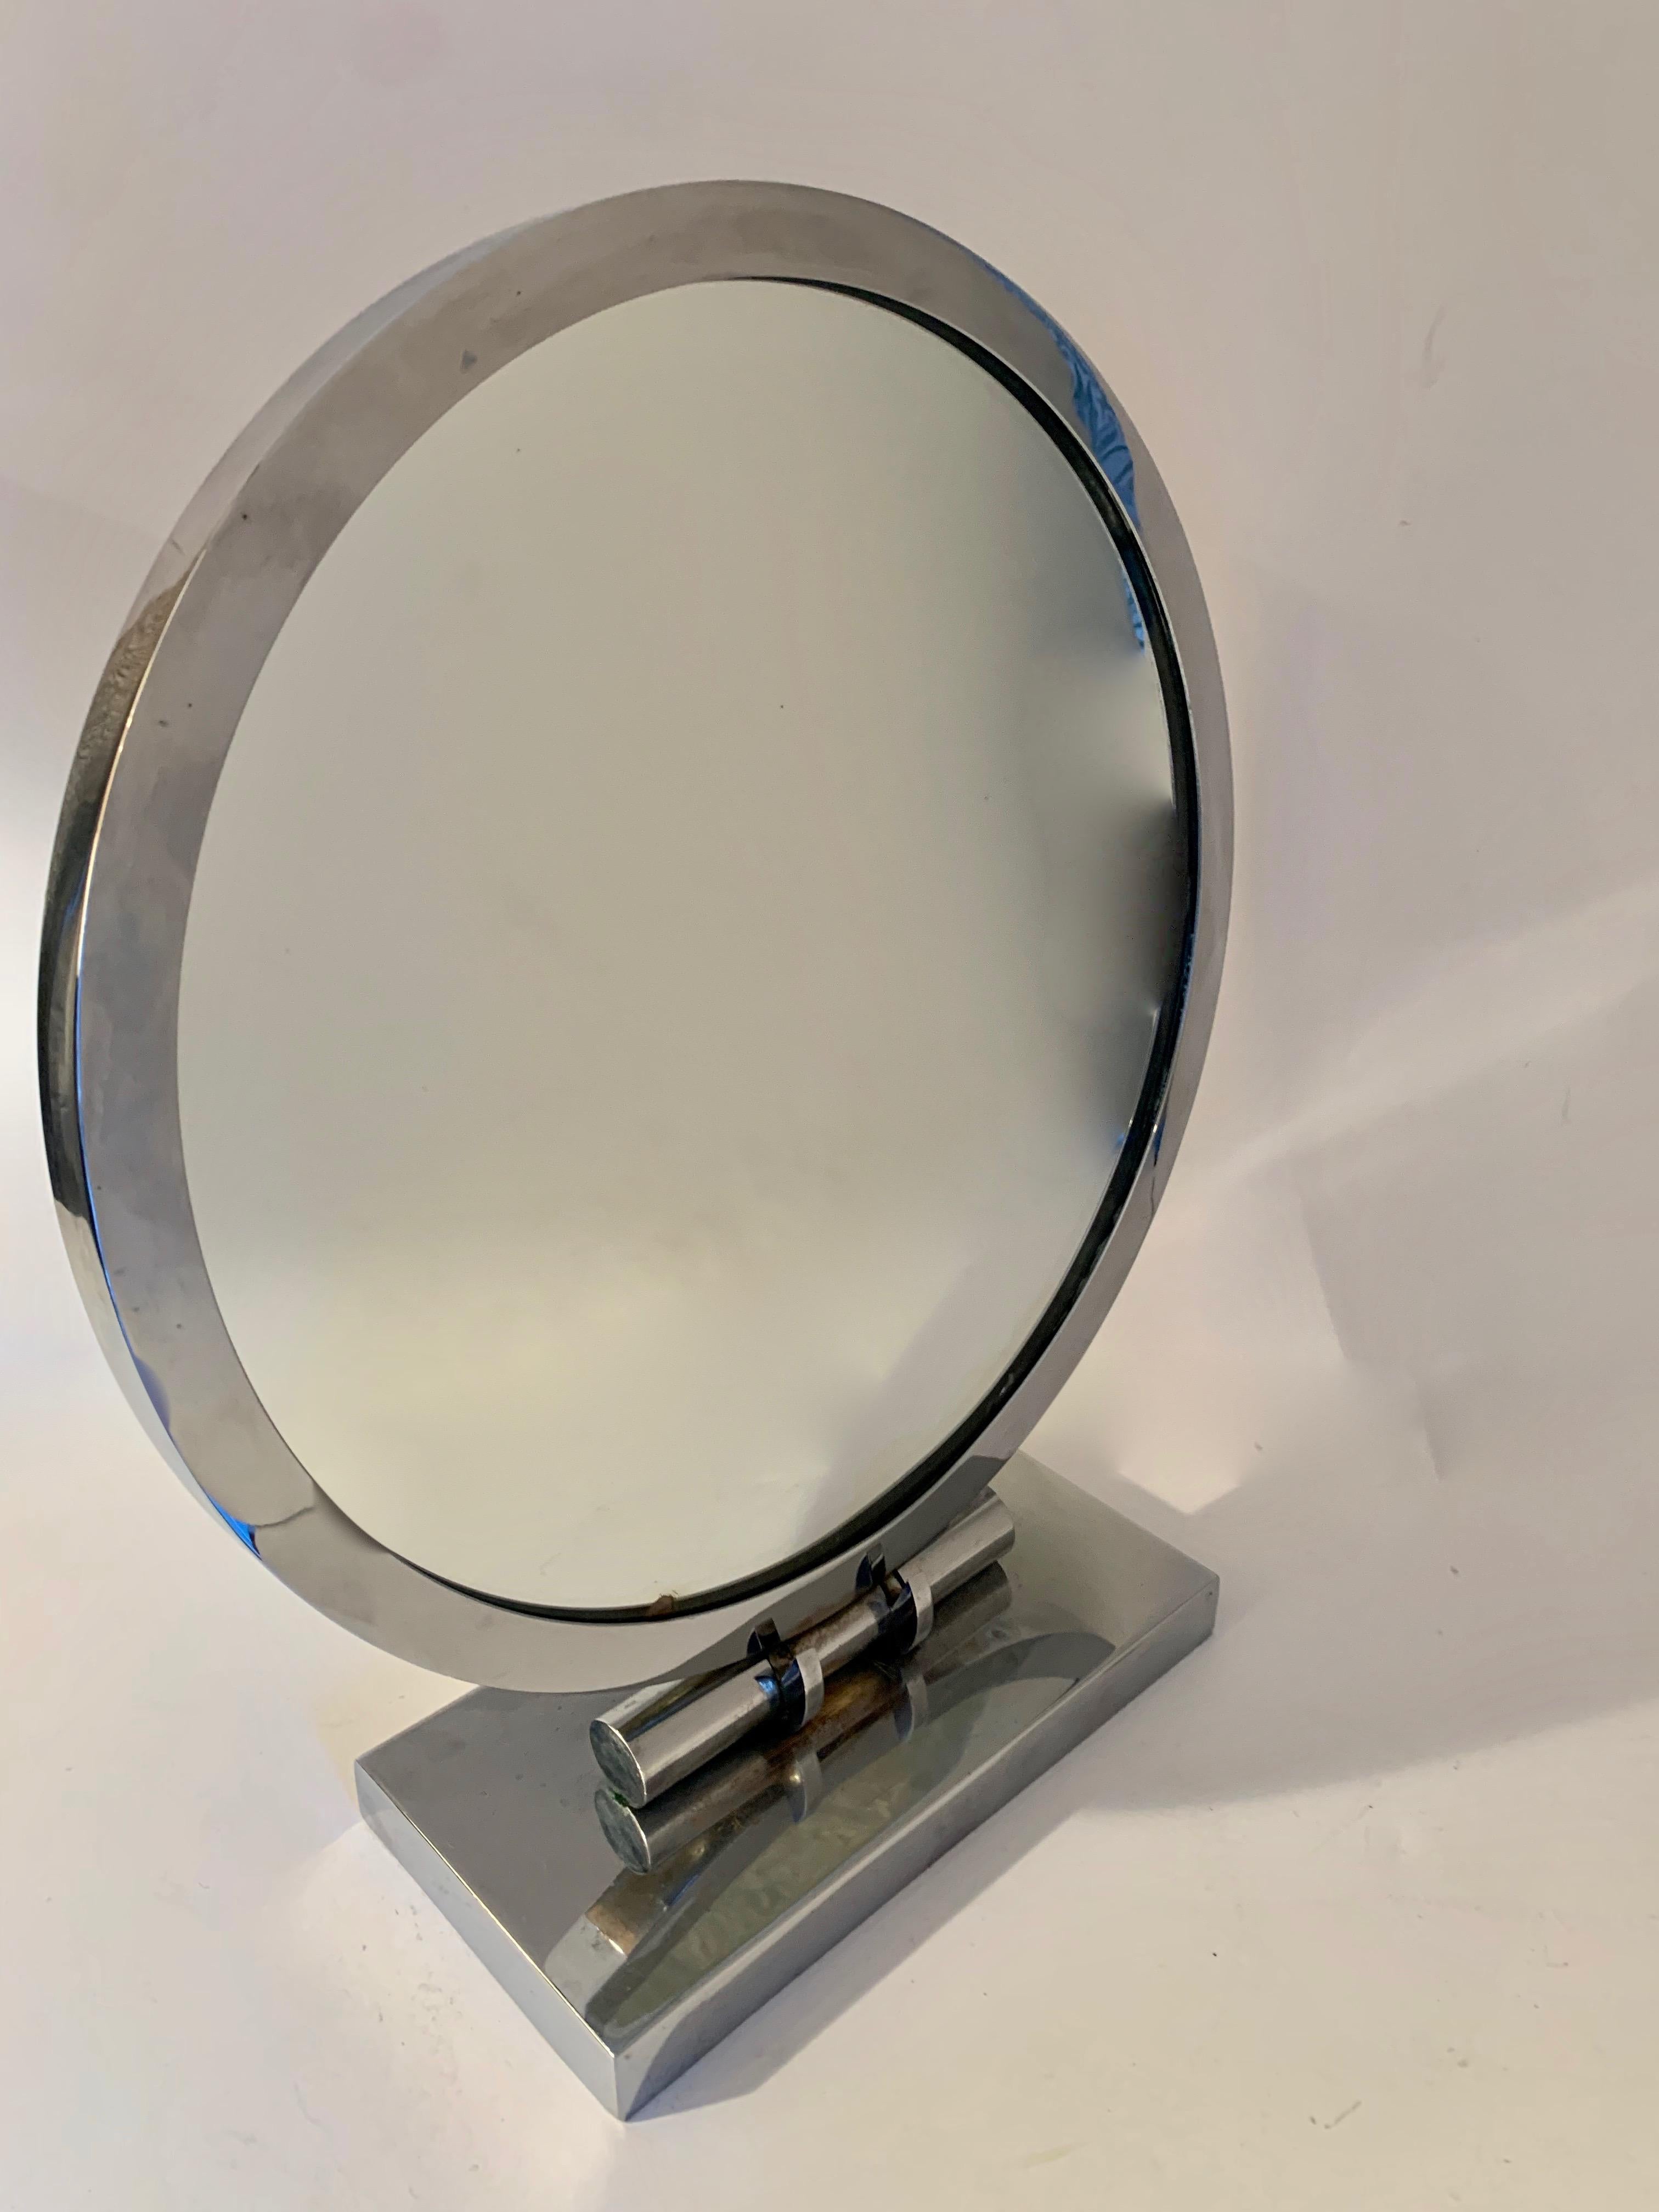 Art Deco adjustable vanity mirror - chrome-plated. The Mirror is one sided and has a small blemish on the lower portion of the mirror. The base has a very nice adjustable feature which works well. The base does have some signs of age, but overall an